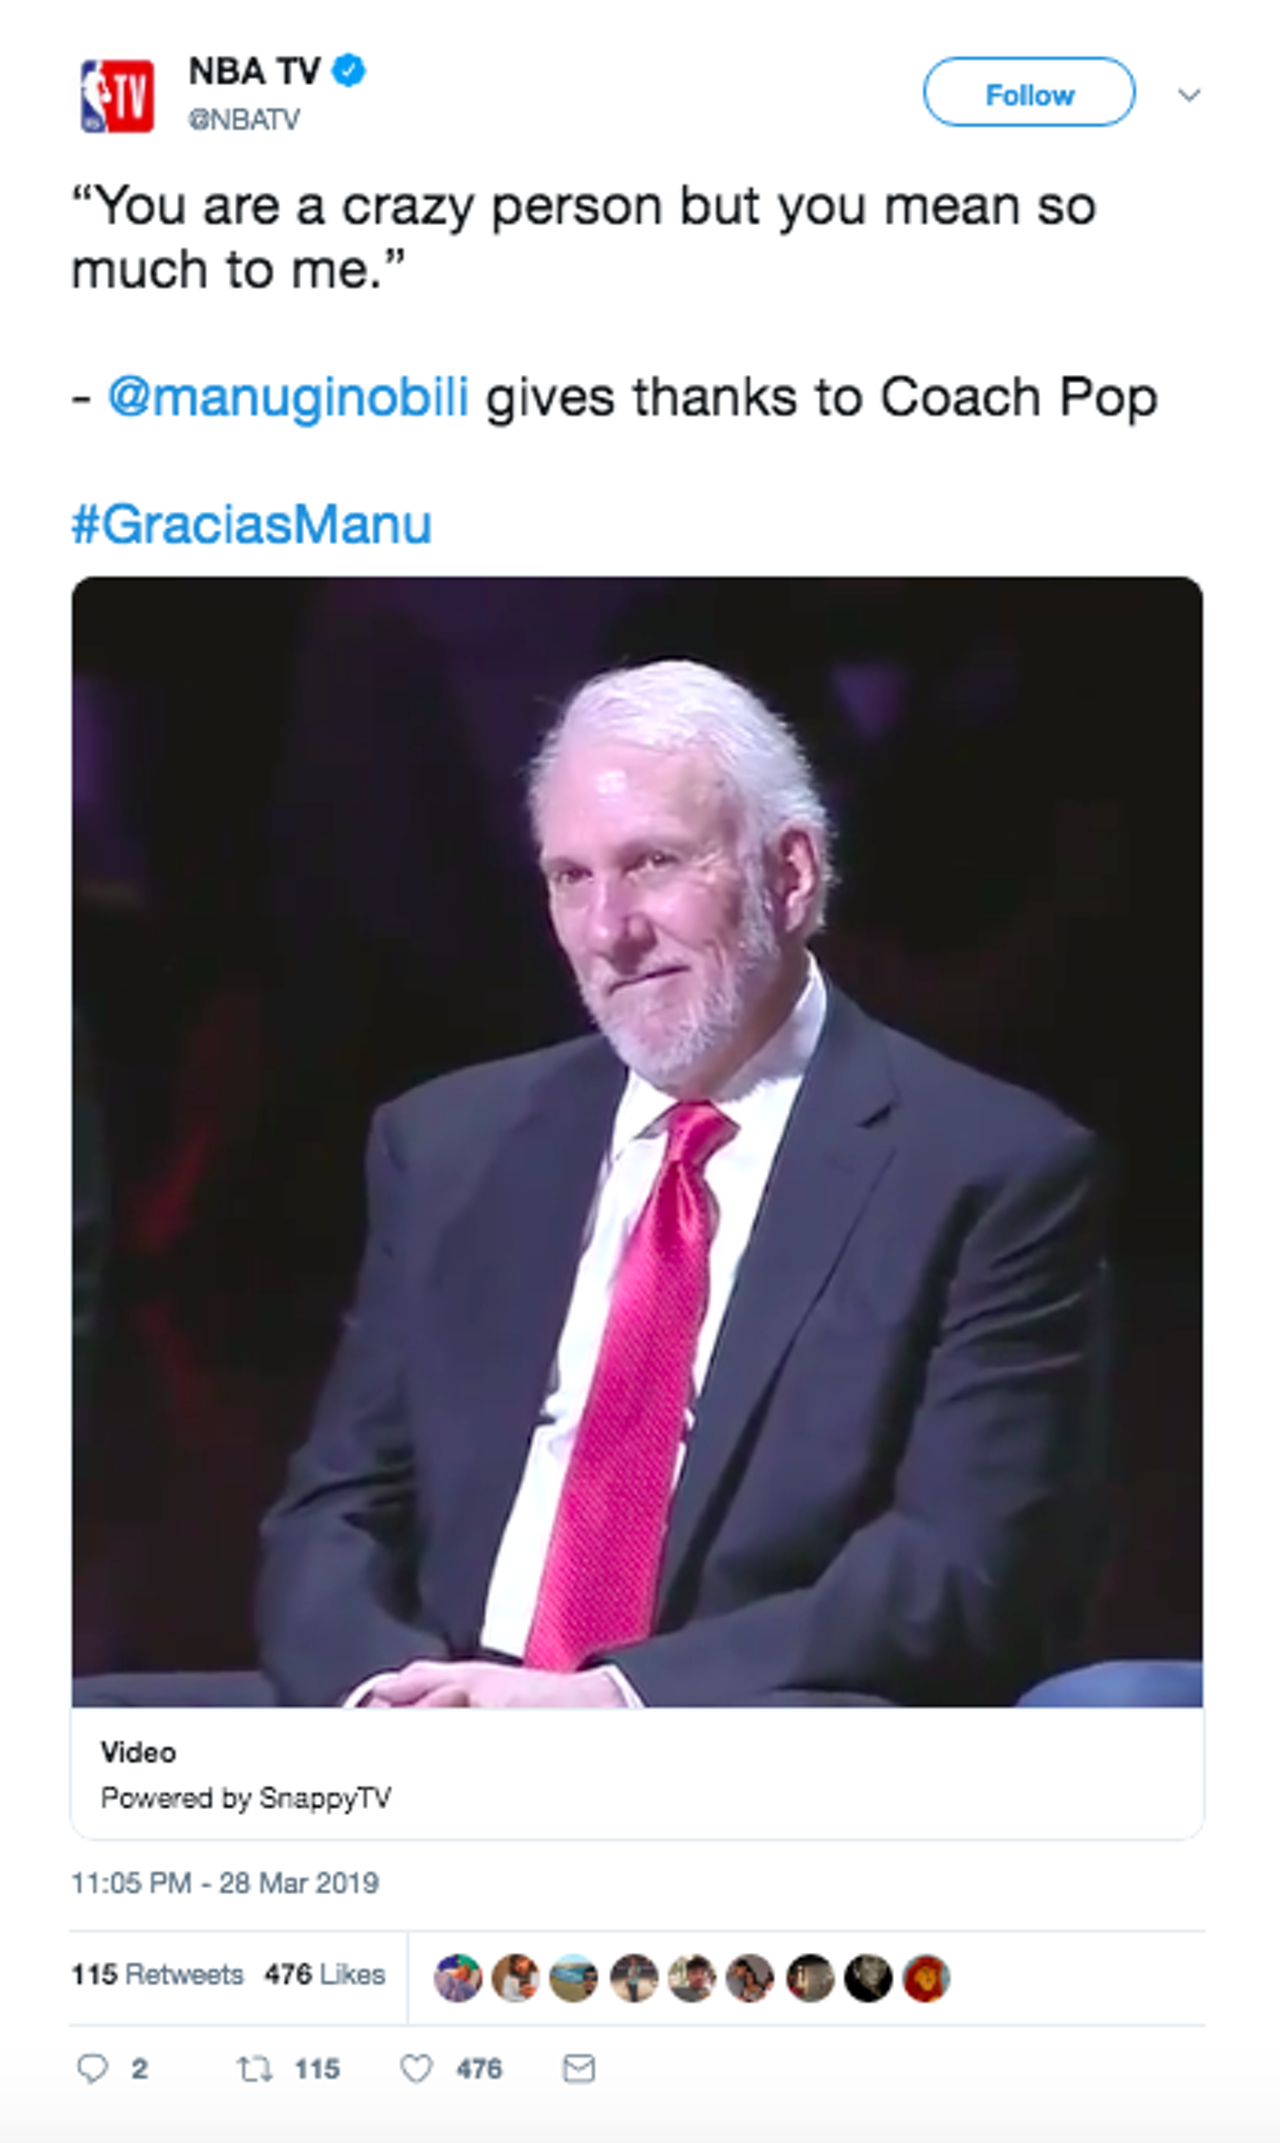 When Manu praised – and gave thanks to – Coach Pop
Source